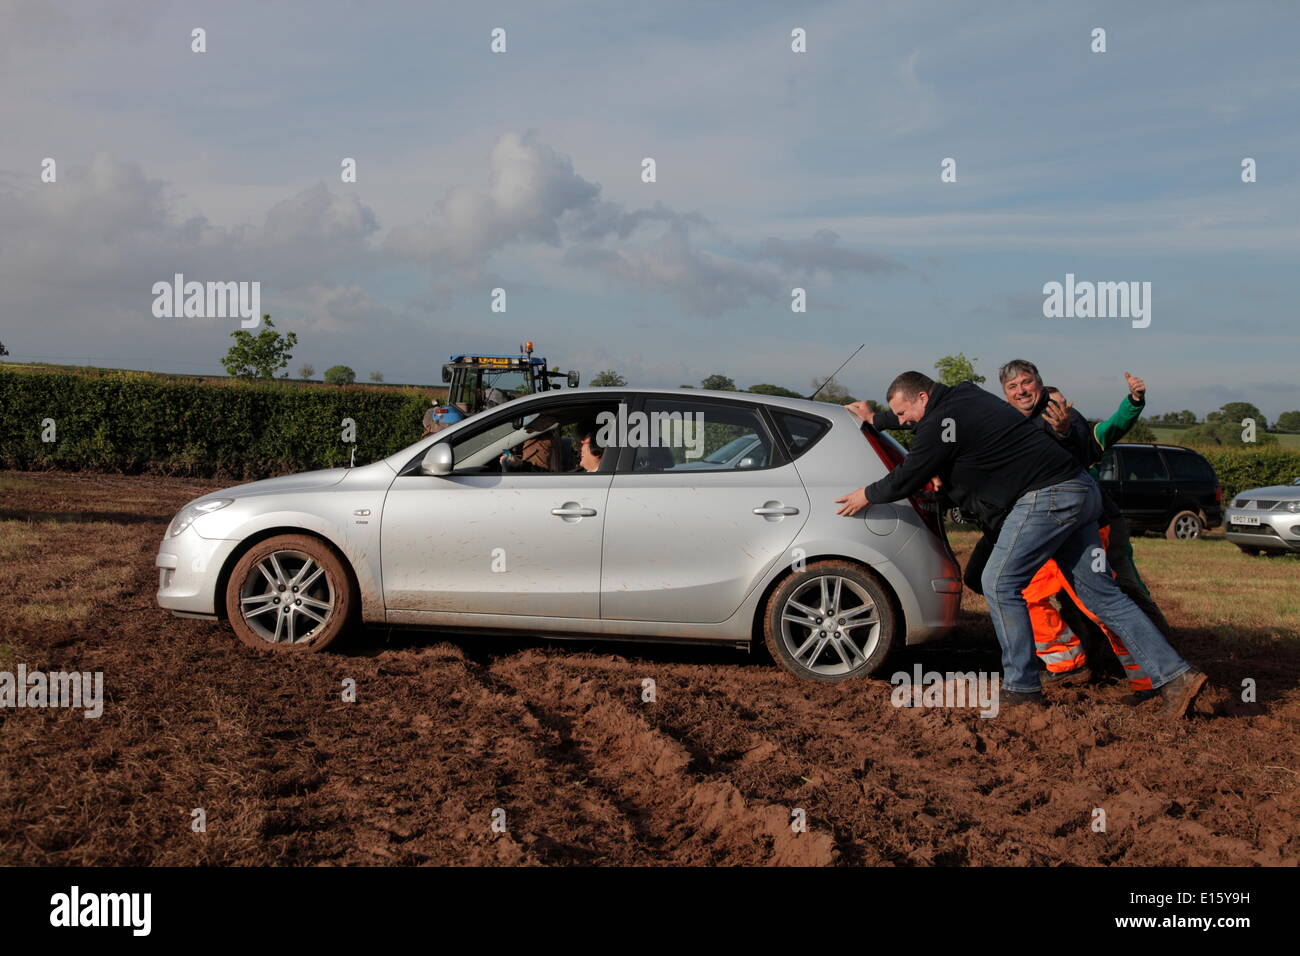 Exeter, Devon, UK. 23rd May, 2014. Devon County Show cancelled because of safety concerns due to heavy rain. The rain left car parks unusable. Tractors help get cars out of the deep mud. Credit:  Anthony Collins/Alamy Live News Stock Photo